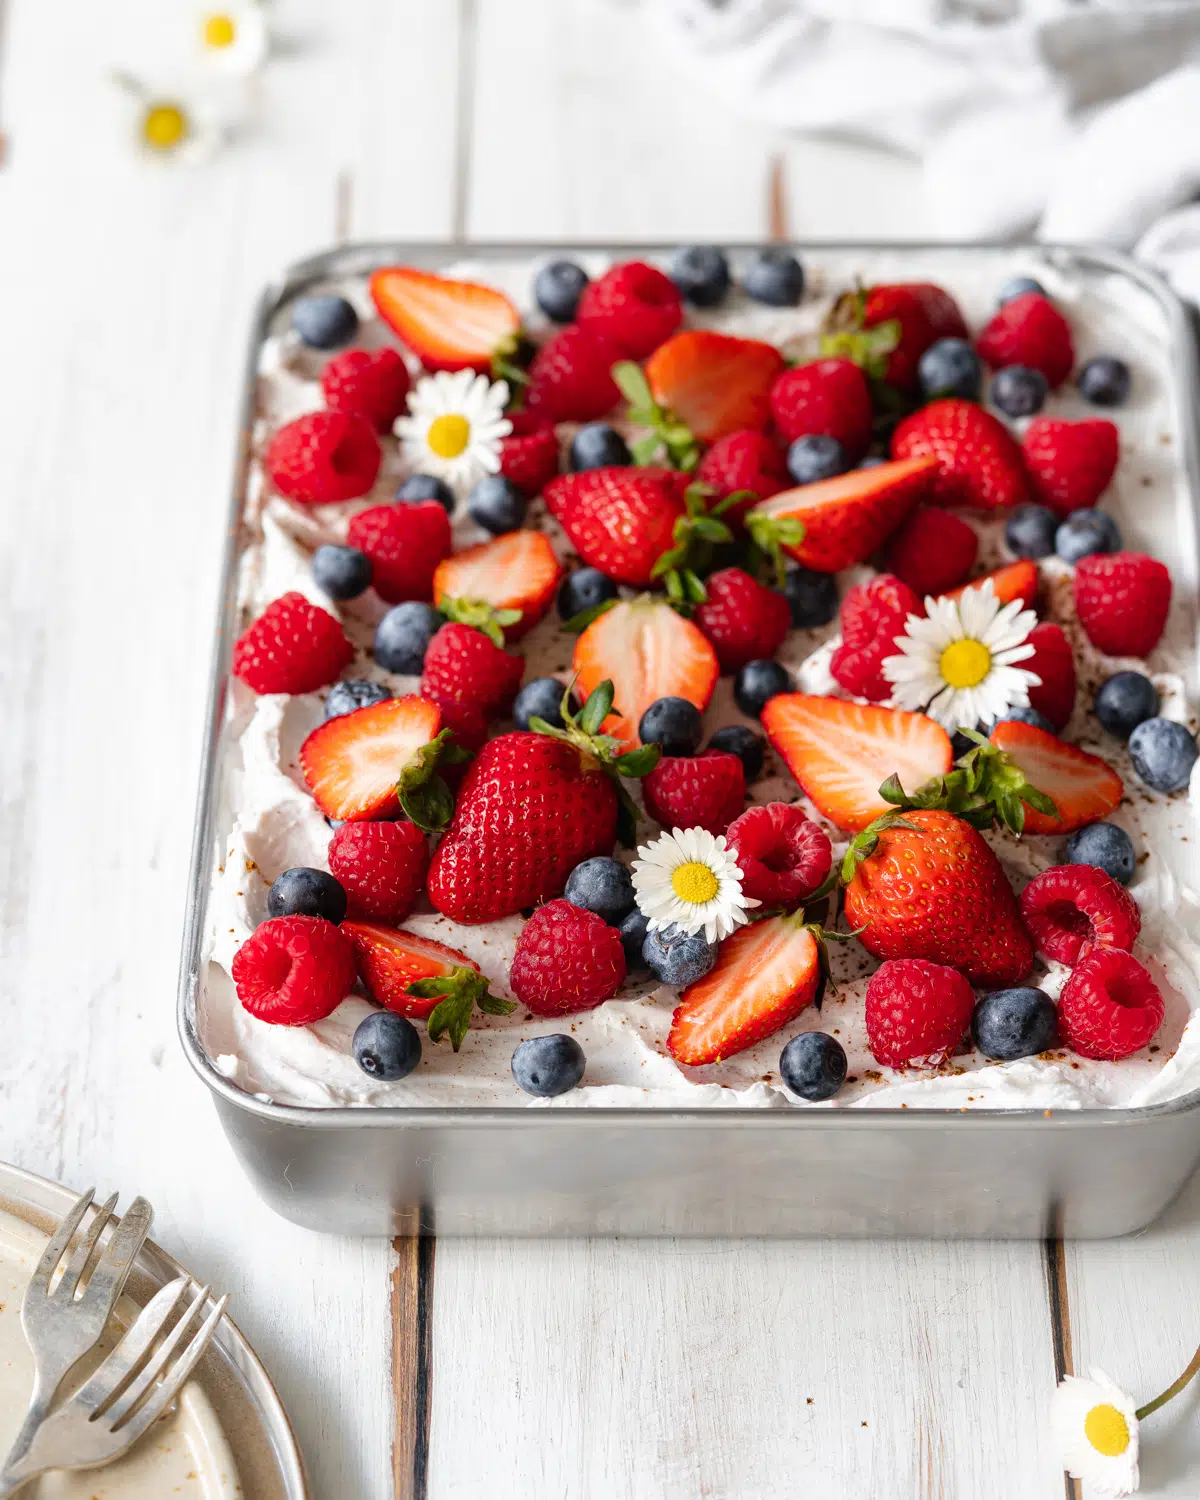 tray of tres leche with fresh strawberries, blueberries and raspberries on top.